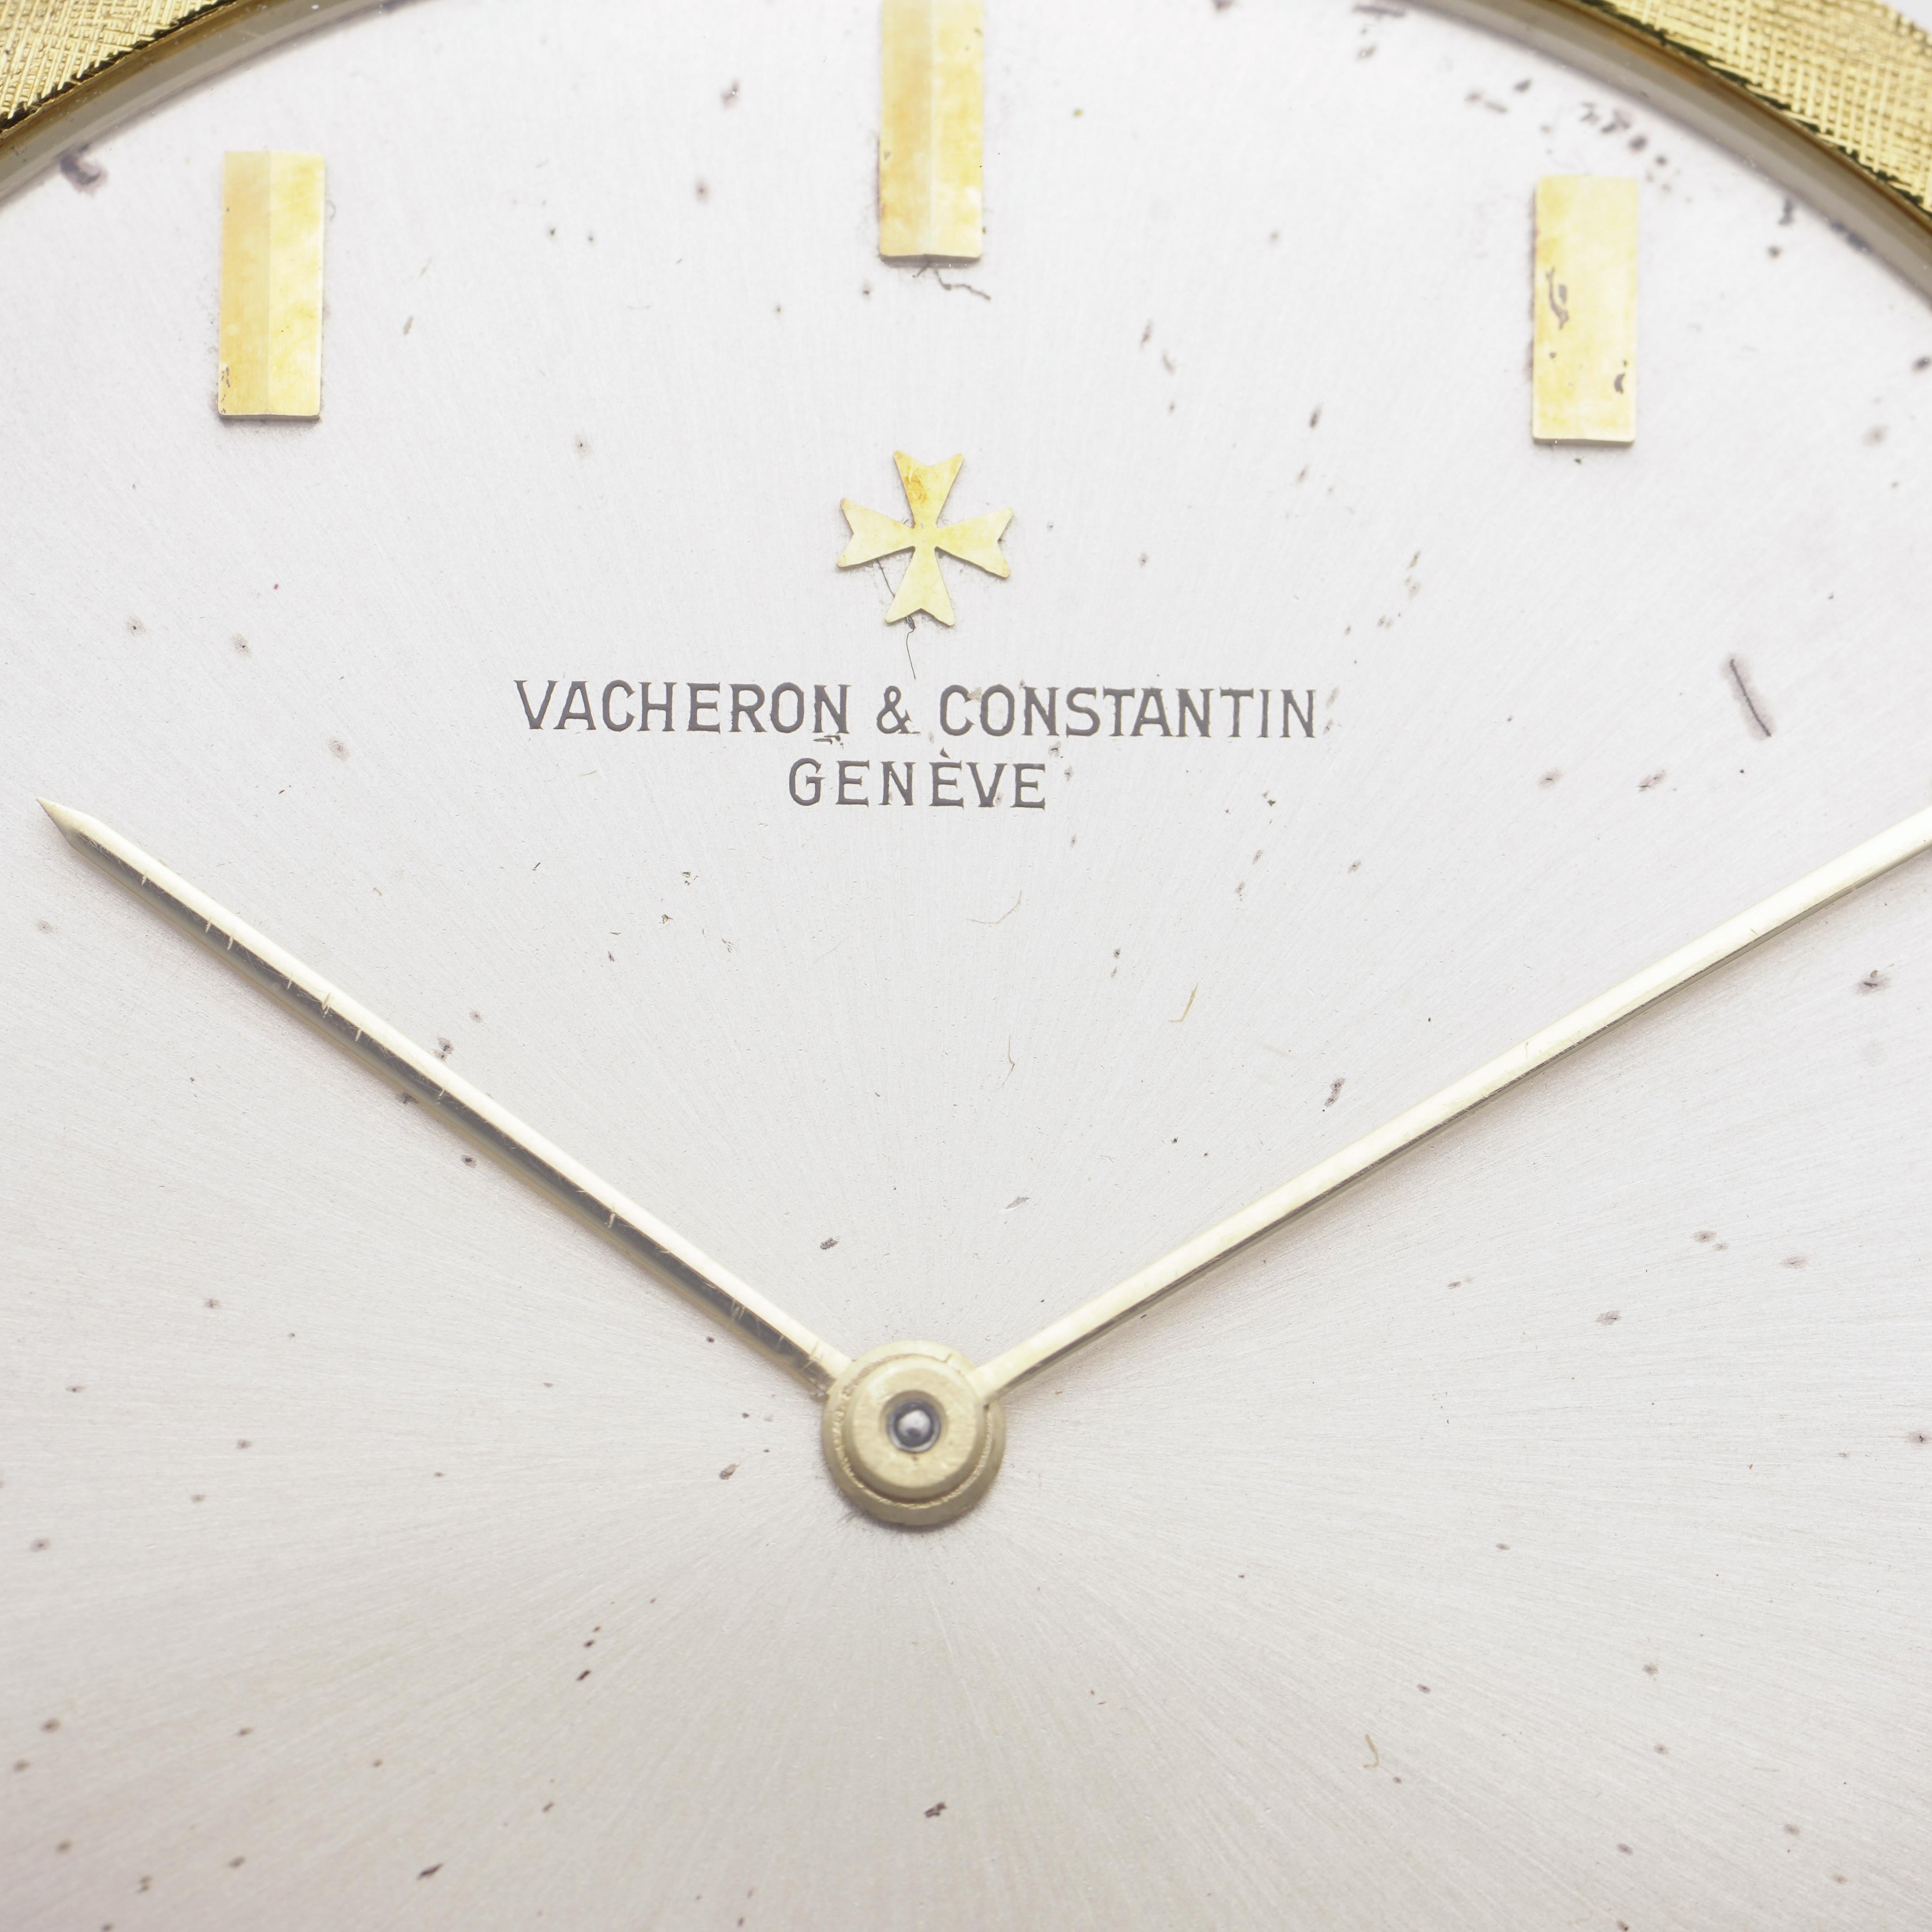 Vacheron Constantin 18kt. yellow gold open-face dress pocket watch with brushed gold finish.
The watch is extra thin.

Made in Switzerland, Circa 1960's
Signed: Case, dial & movement, hallmarked with 18kt. gold.
Movement: 18-jewel Swiss lever,